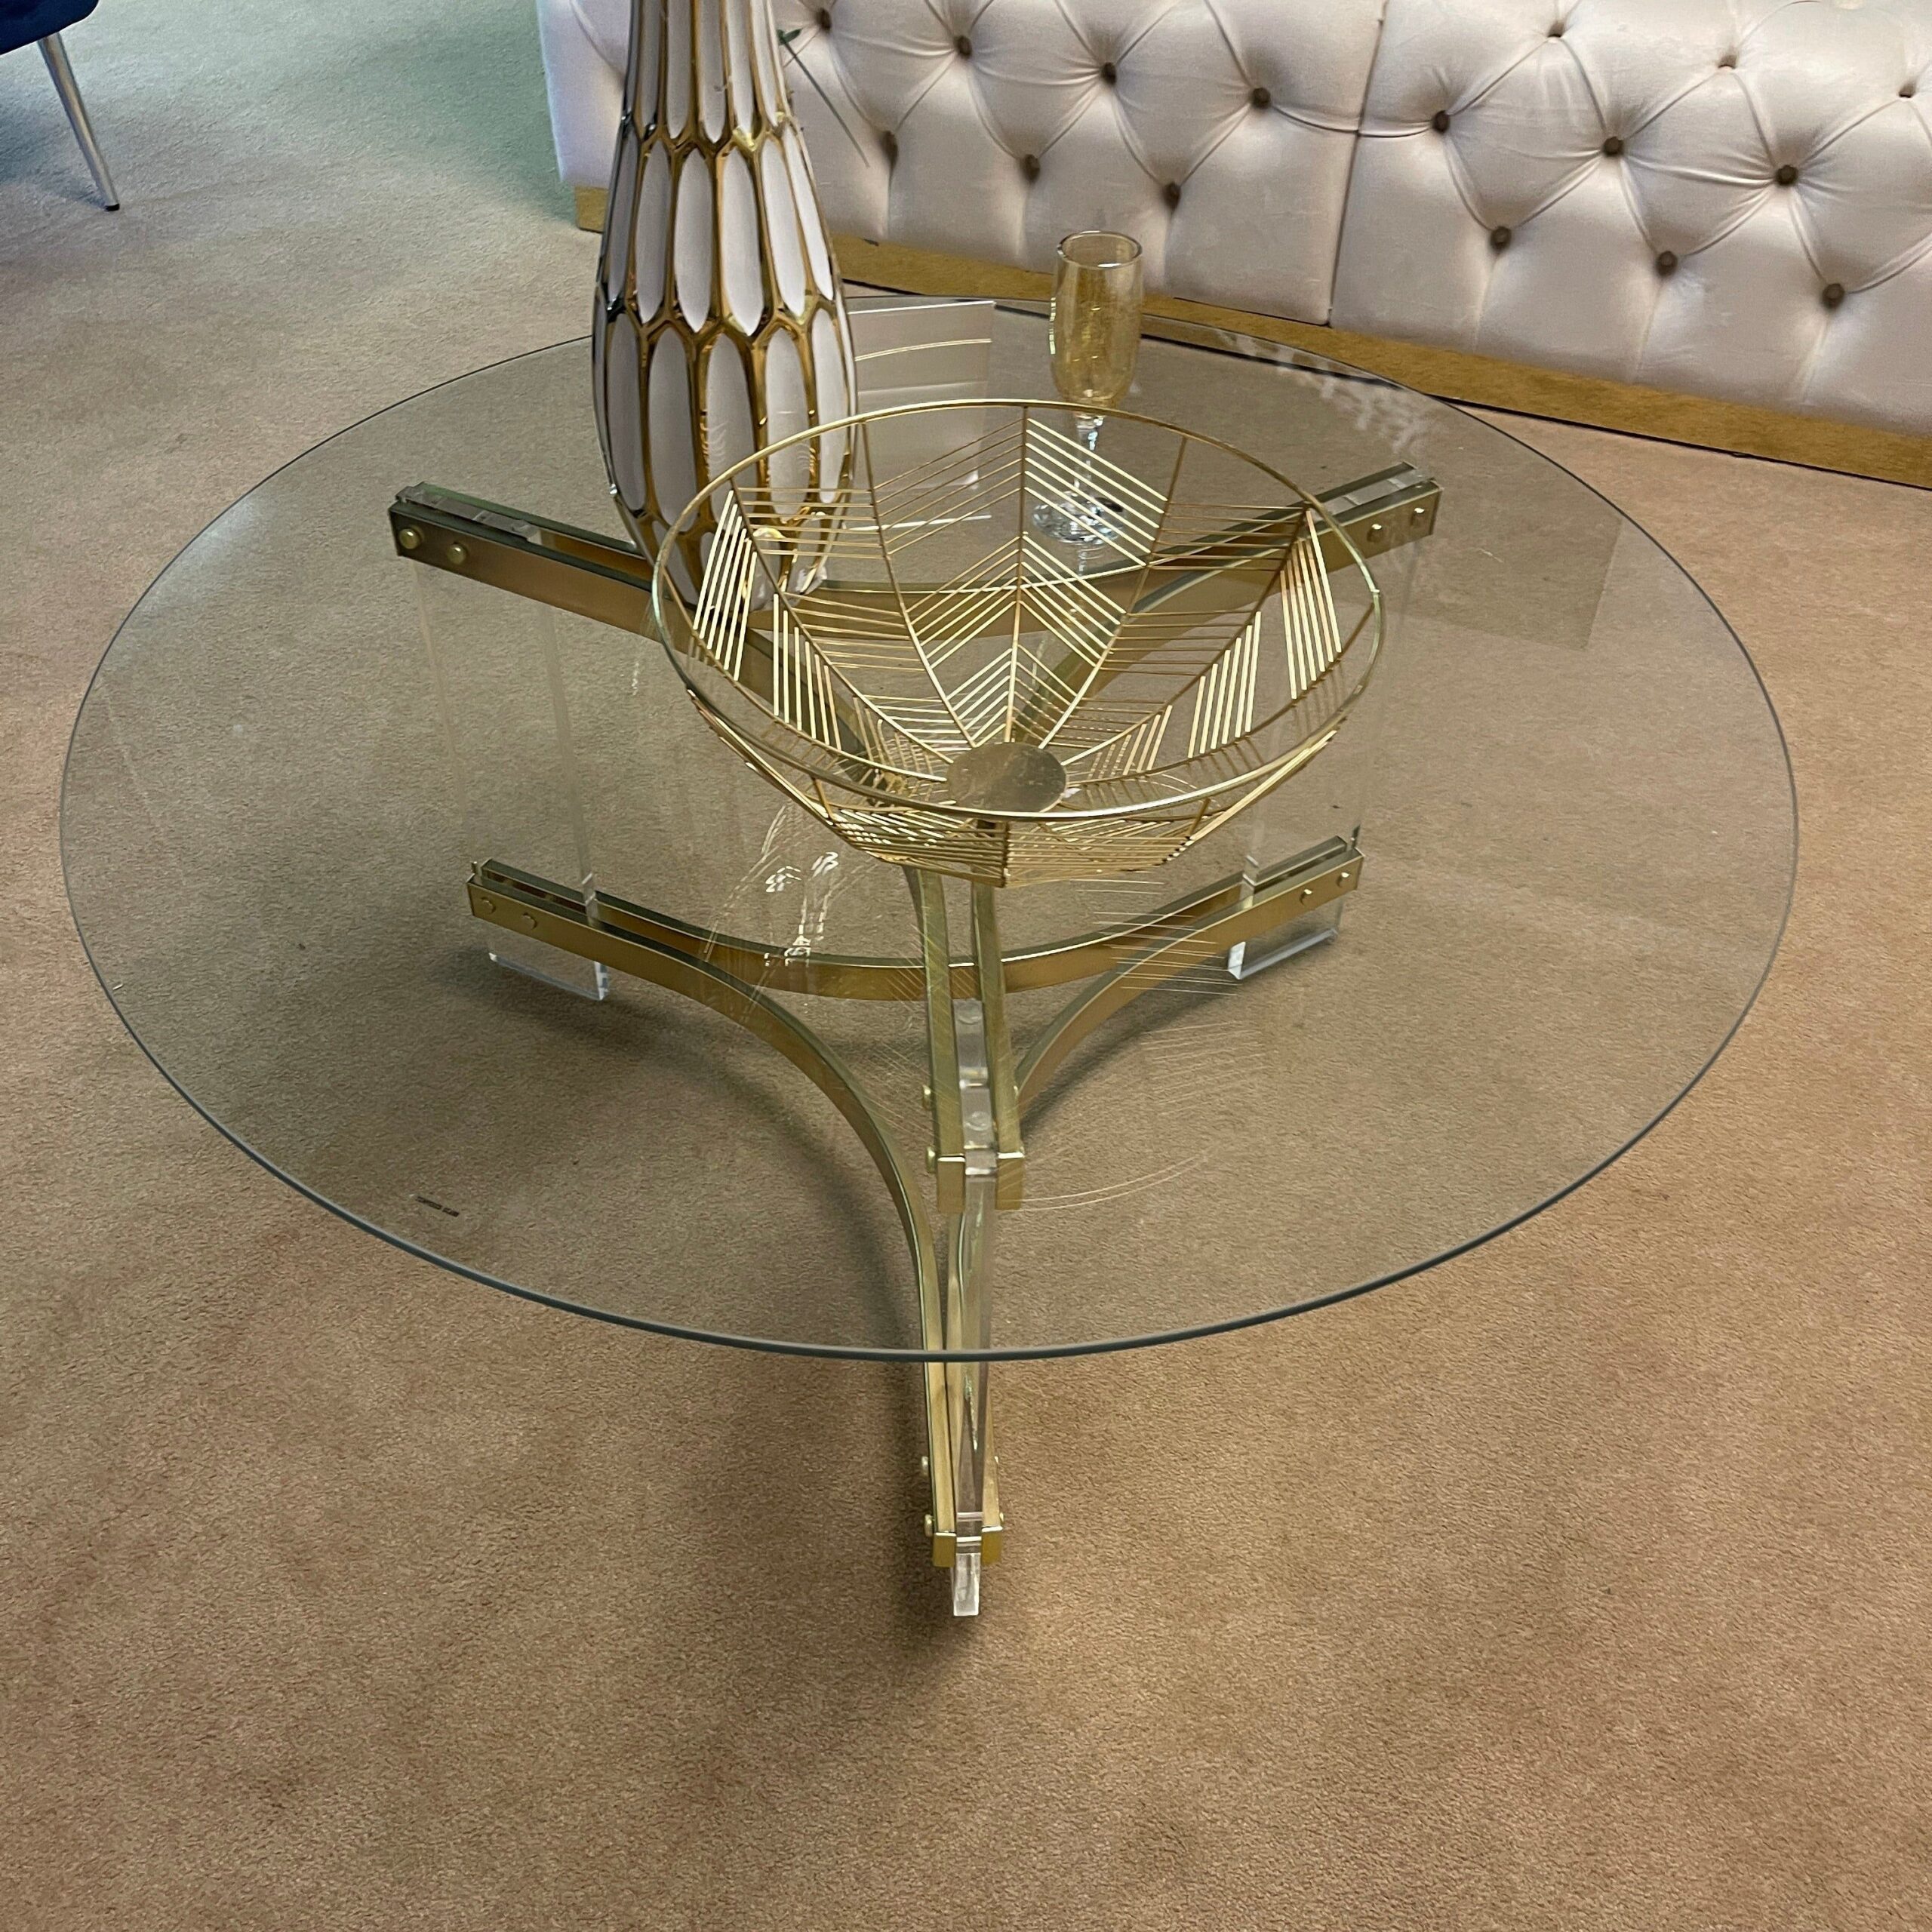 Transparent Elegance: The Beauty of a Clear Acrylic Glass Coffee Table